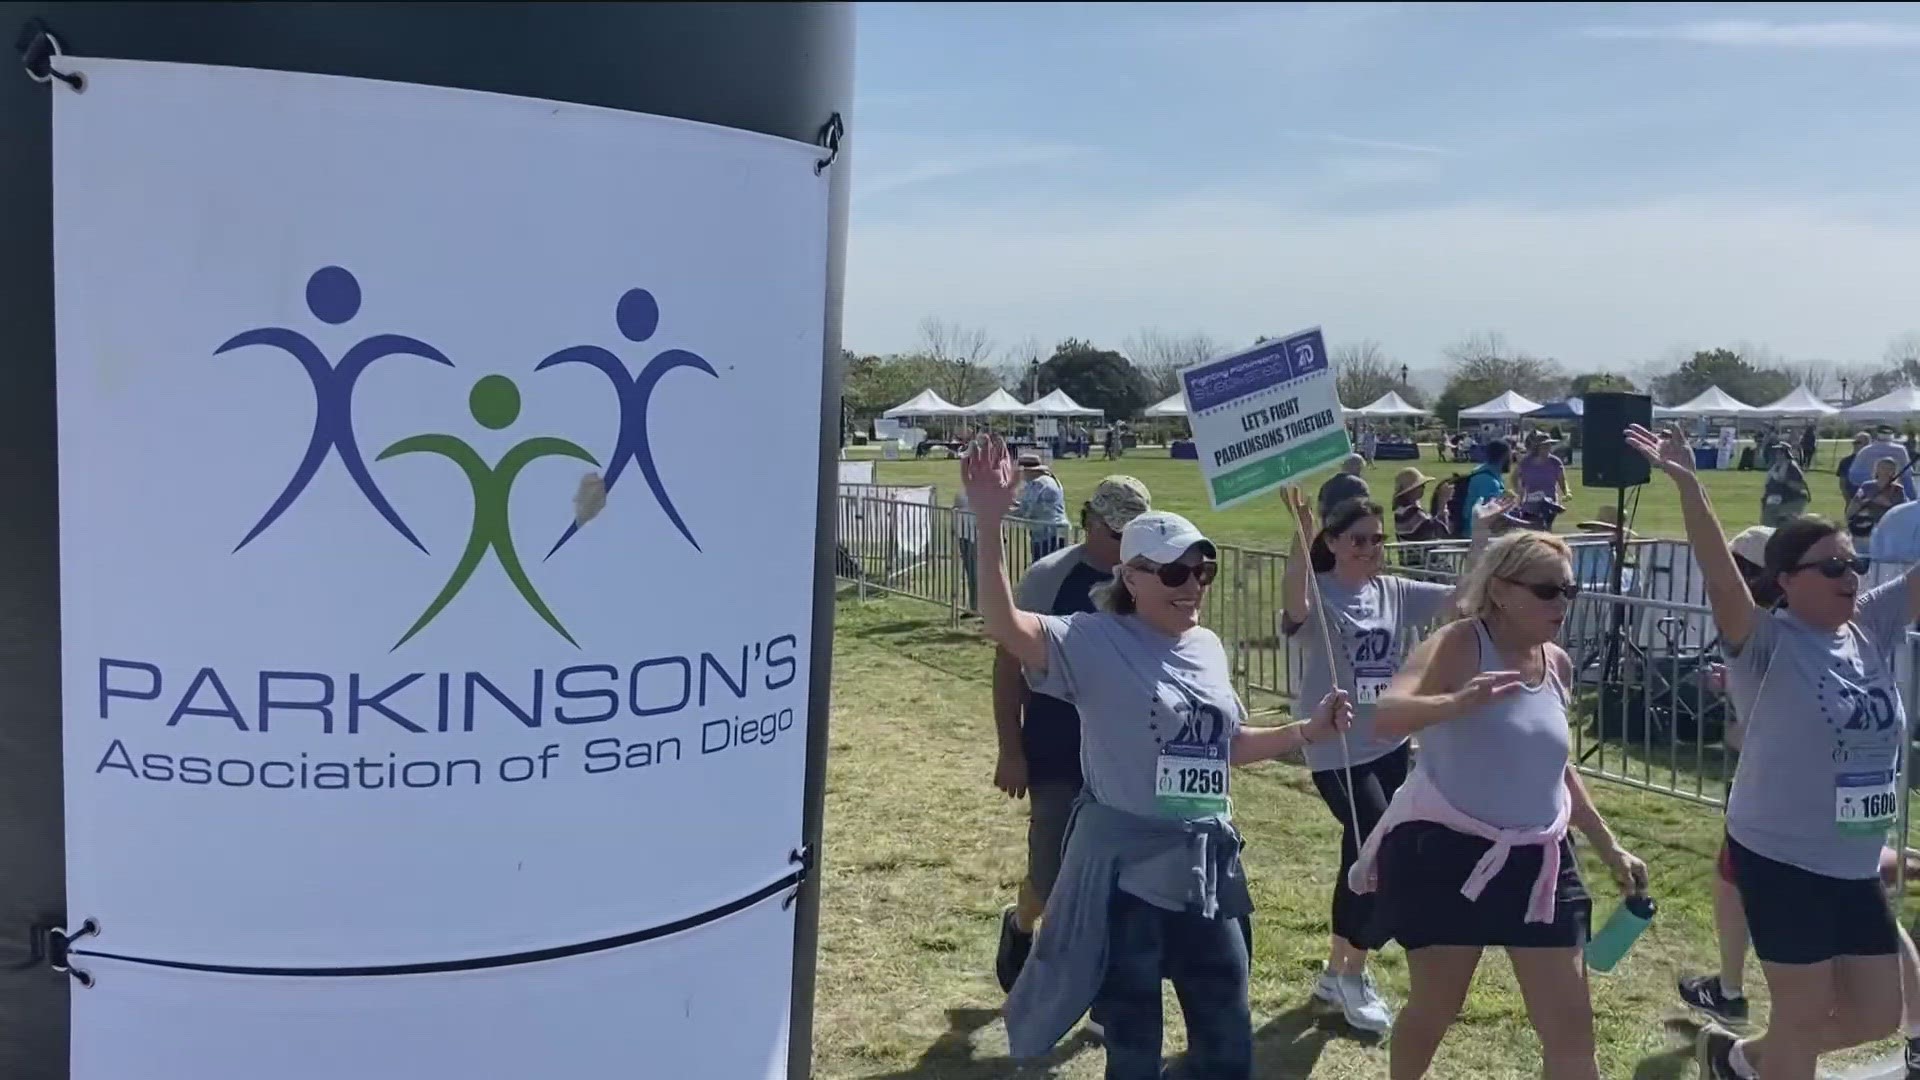 Marty Acevedo, Board President of the Parkinson's Association of San Diego, sat down with CBS 8 to talk on why it's important for people to attend this event.